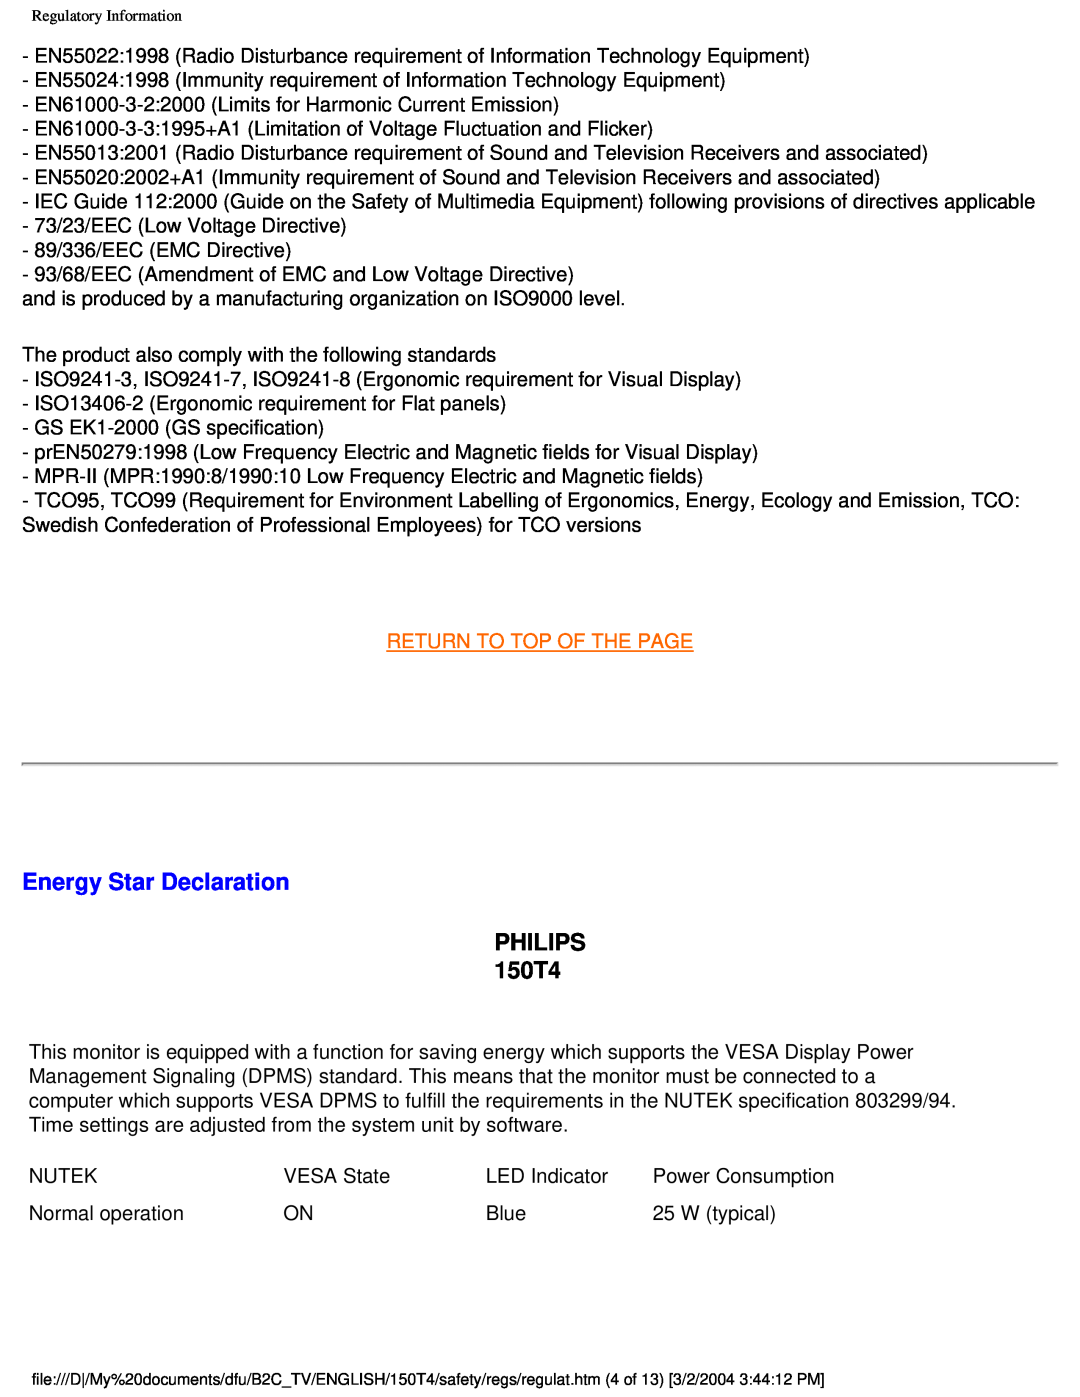 Philips manual Energy Star Declaration, PHILIPS 150T4, Return To Top Of The Page 